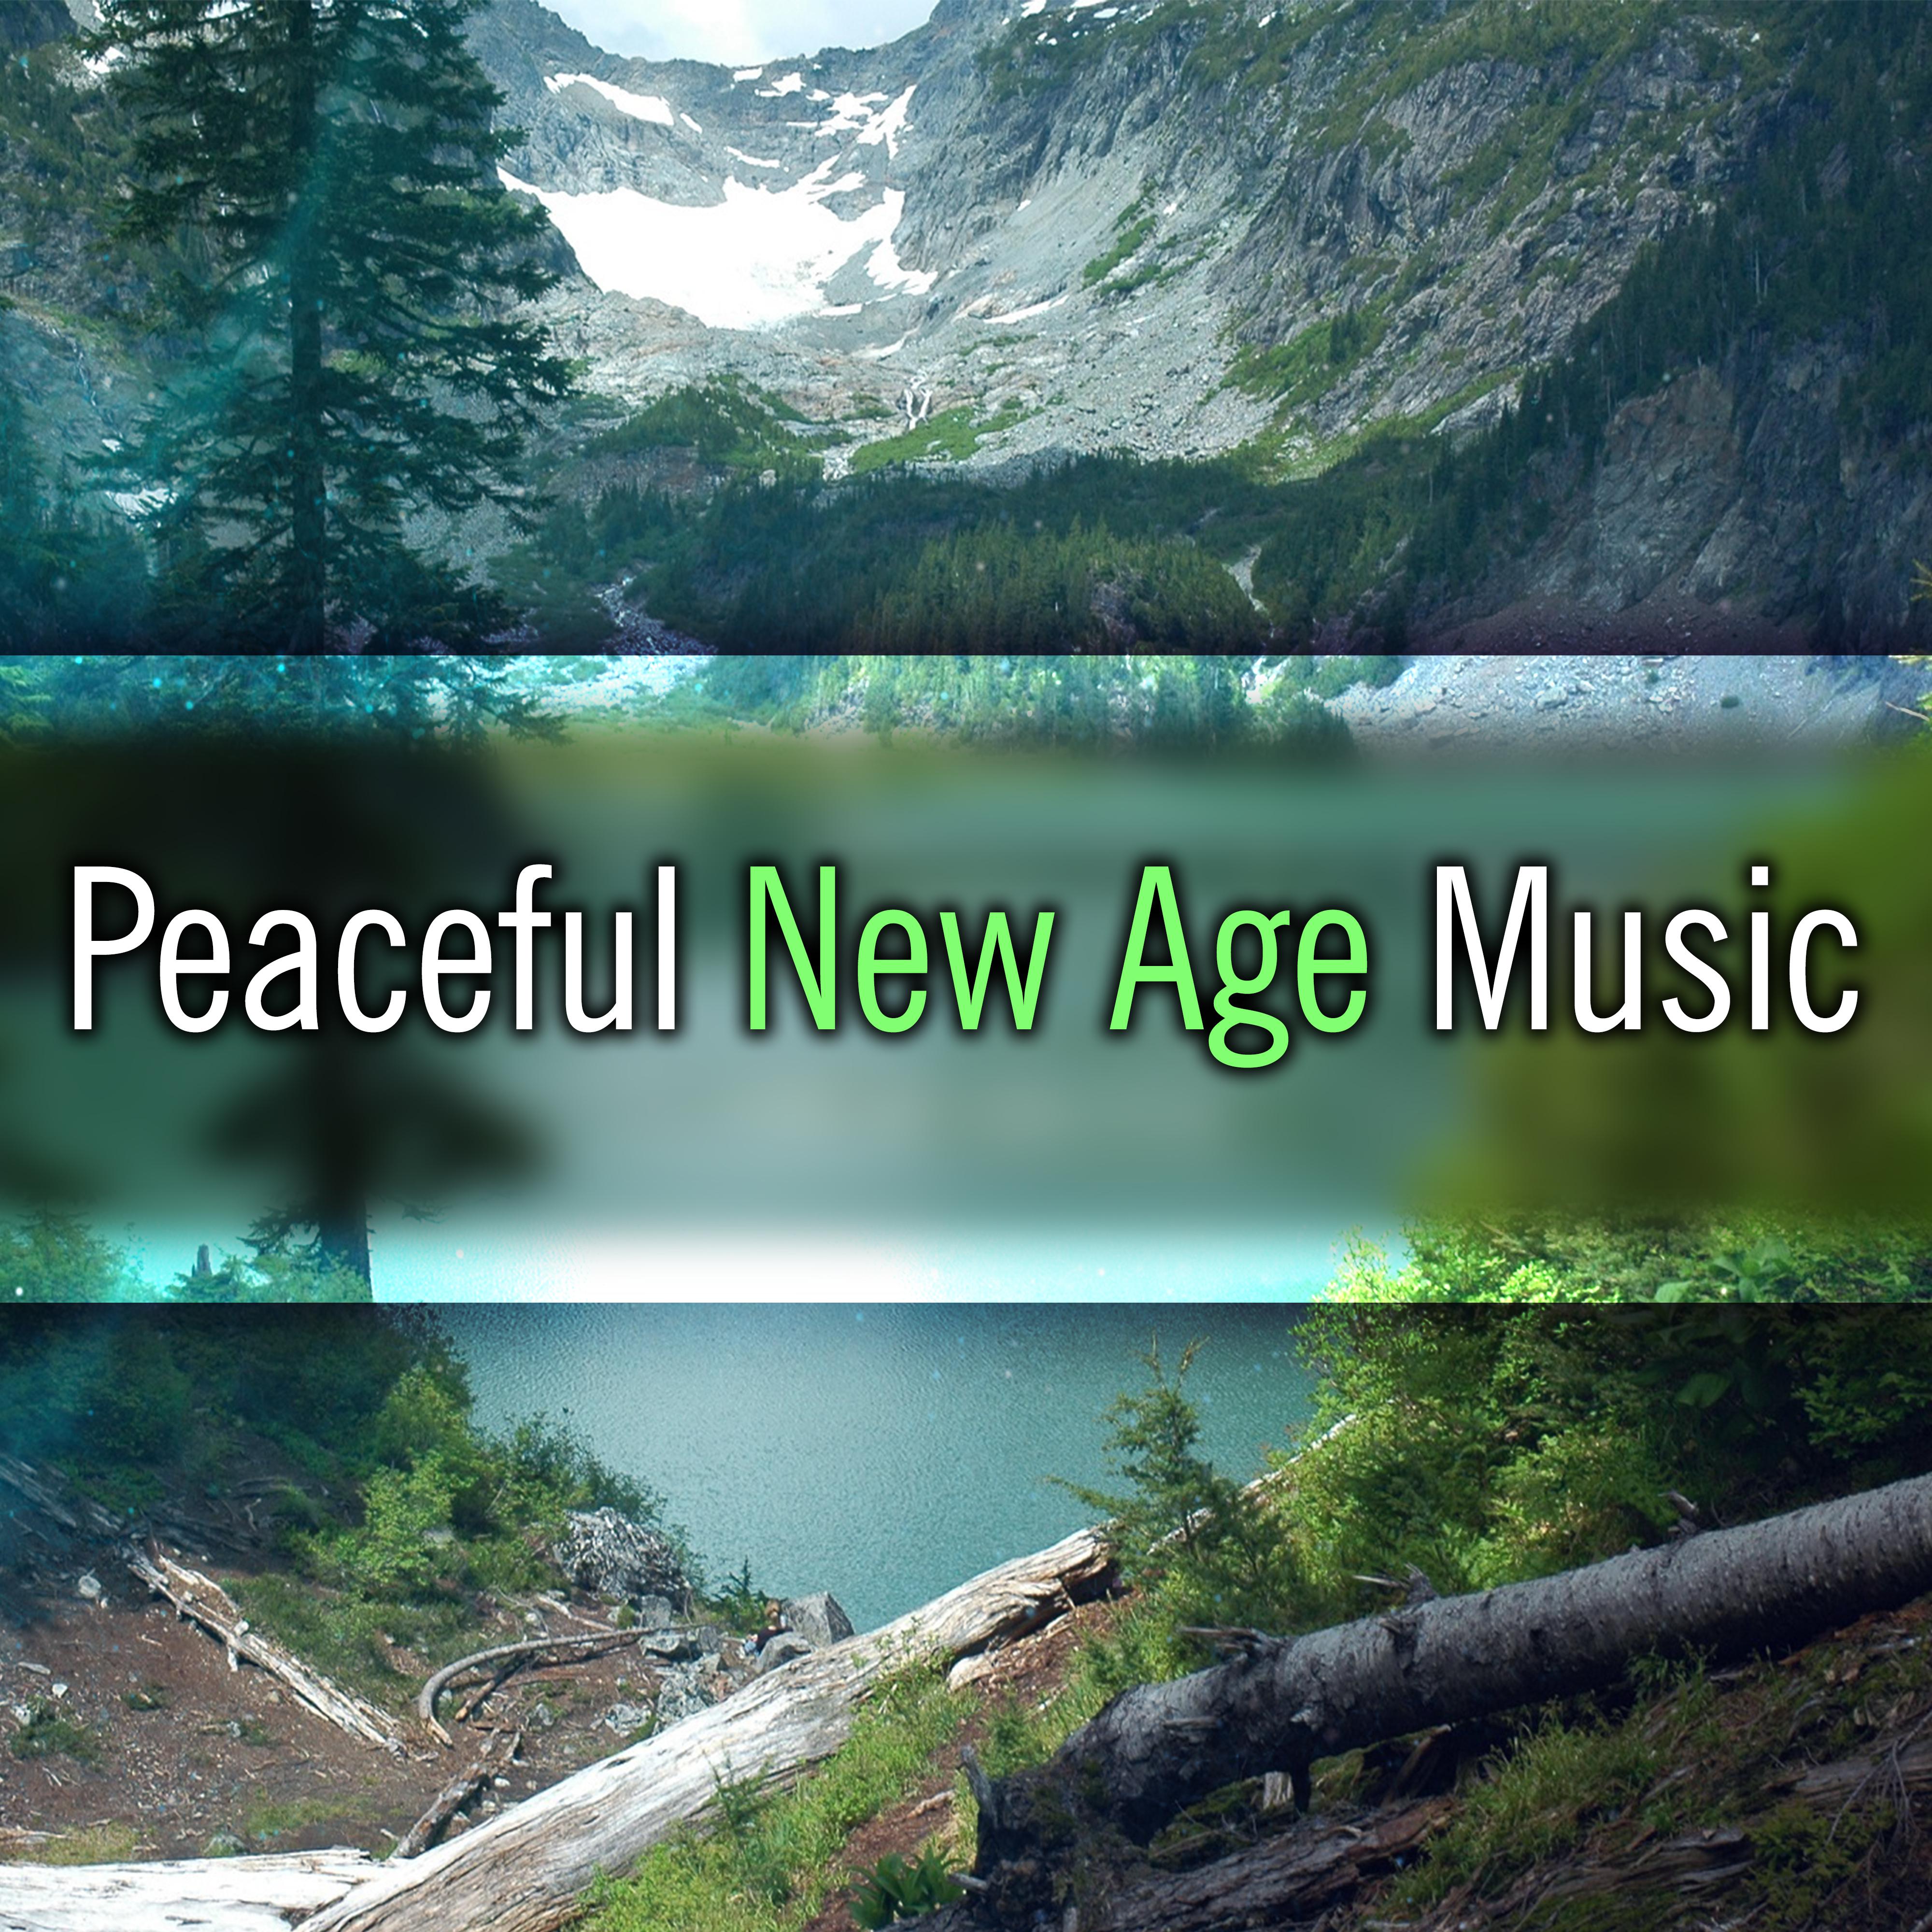 Peaceful New Age Music – Calming Sounds to Relax, Soft Music, Rest a Bit, Soothing Waves